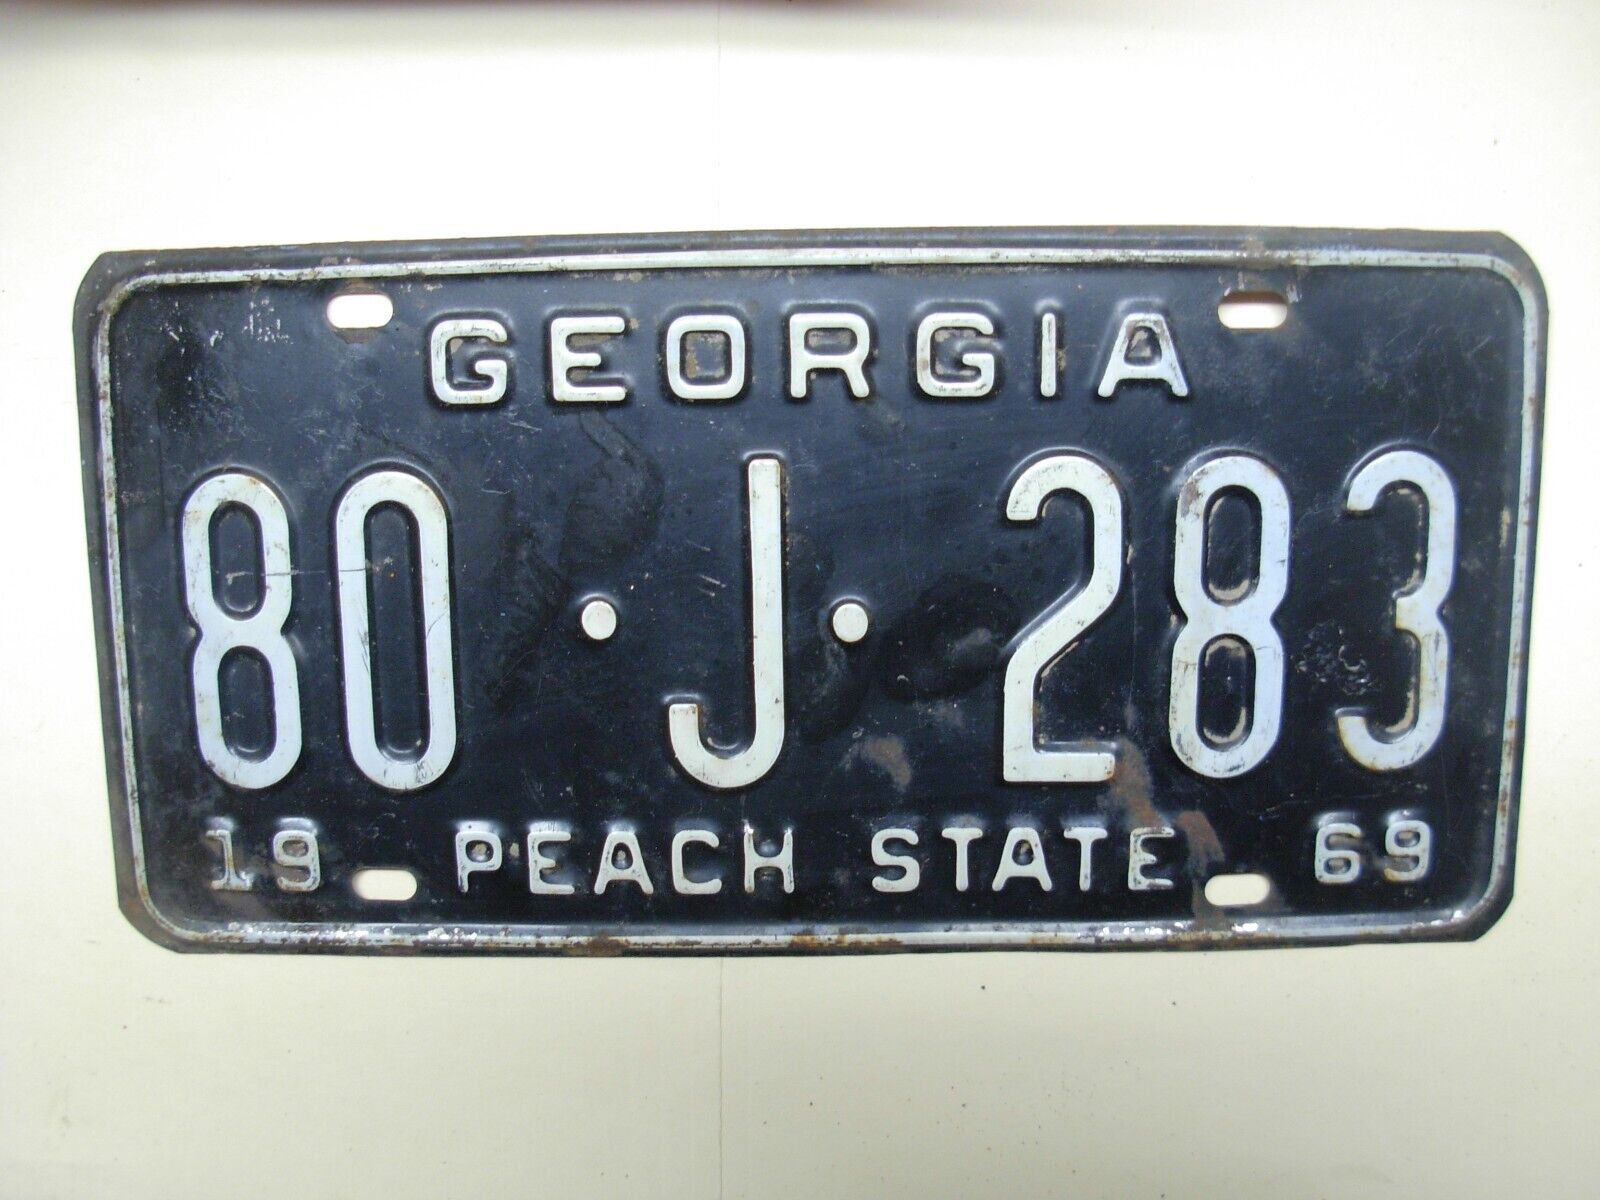 GEORGIA LICENSE PLATE  1969  80.J.283 SEE PHOTO FOR CONDITION